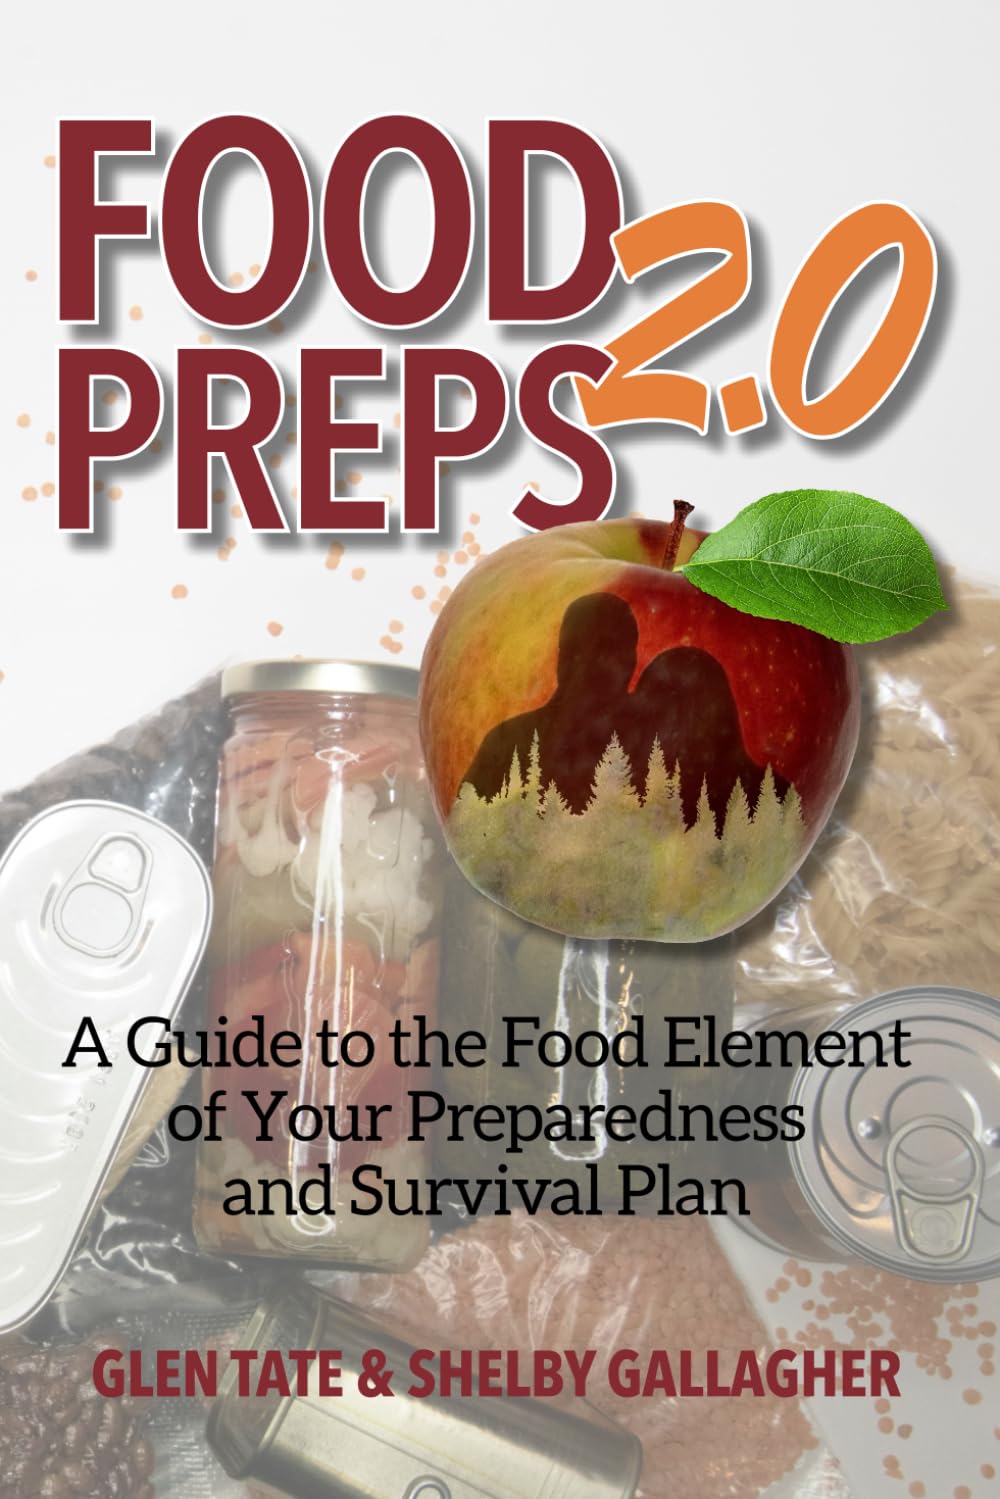 Food Preps 2.0: A Guide to the Food Element of Your Preparedness and Survival Plan